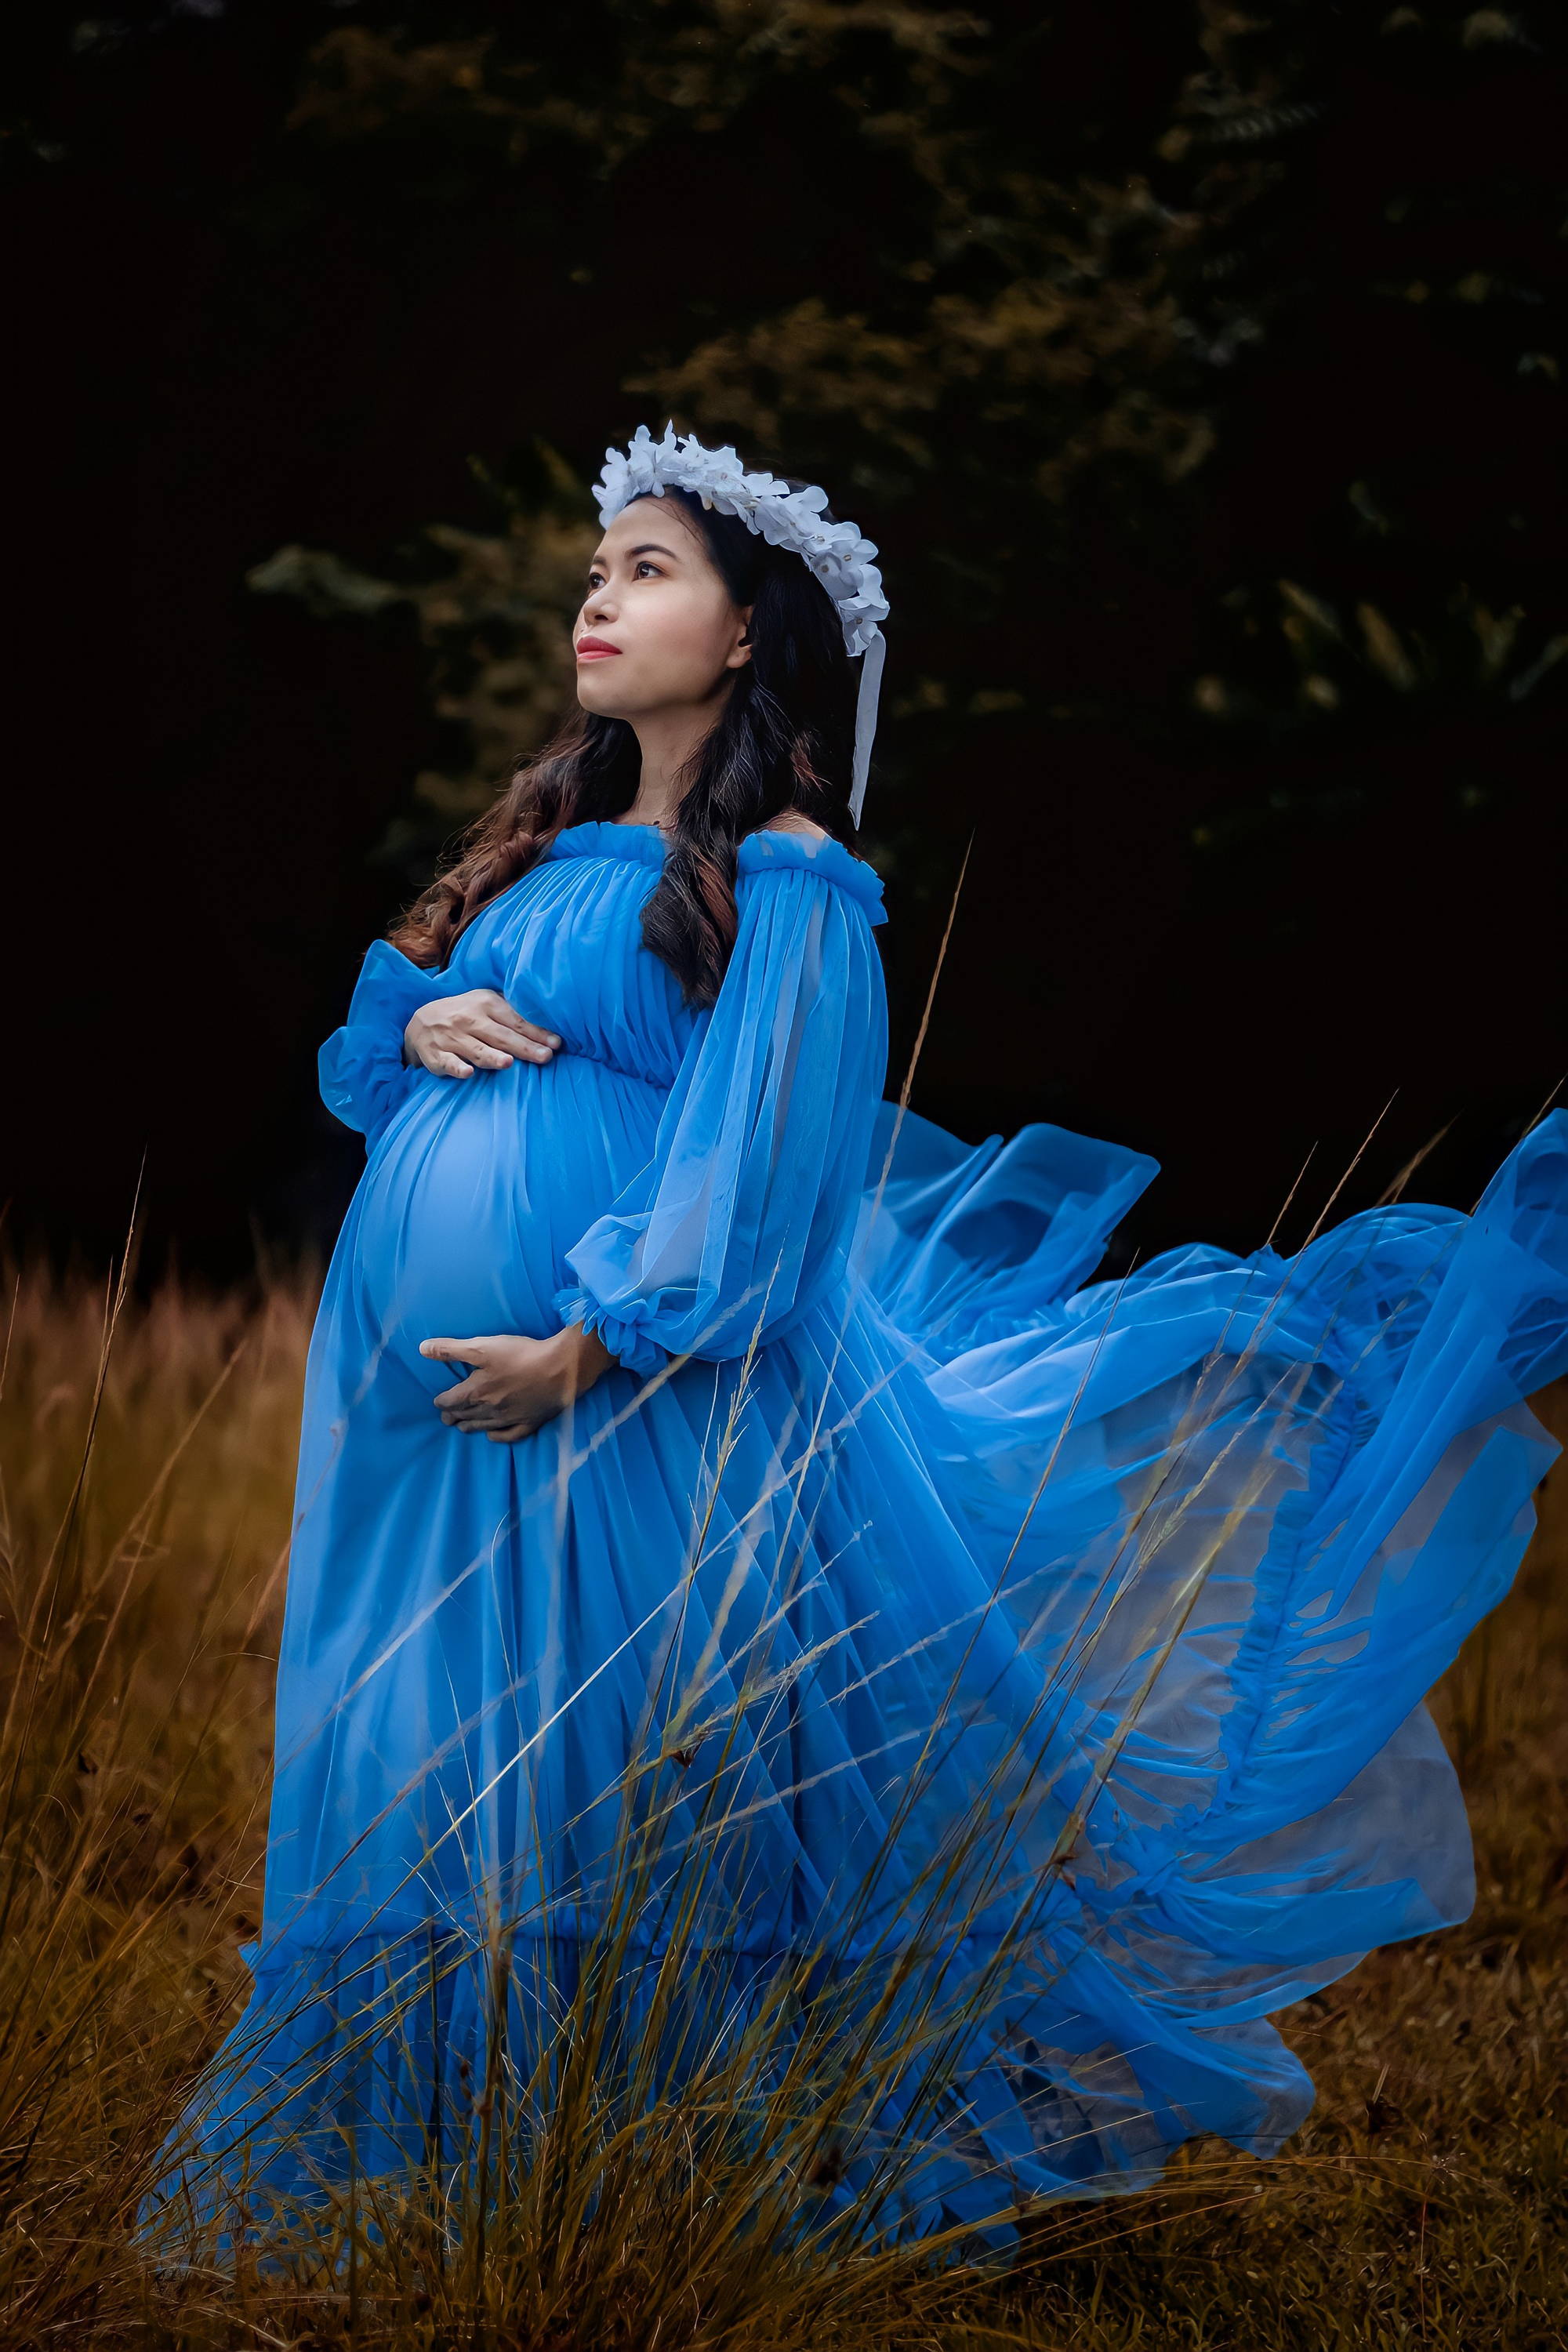 An expectant mom looking all beautiful in a glamorous blue dress